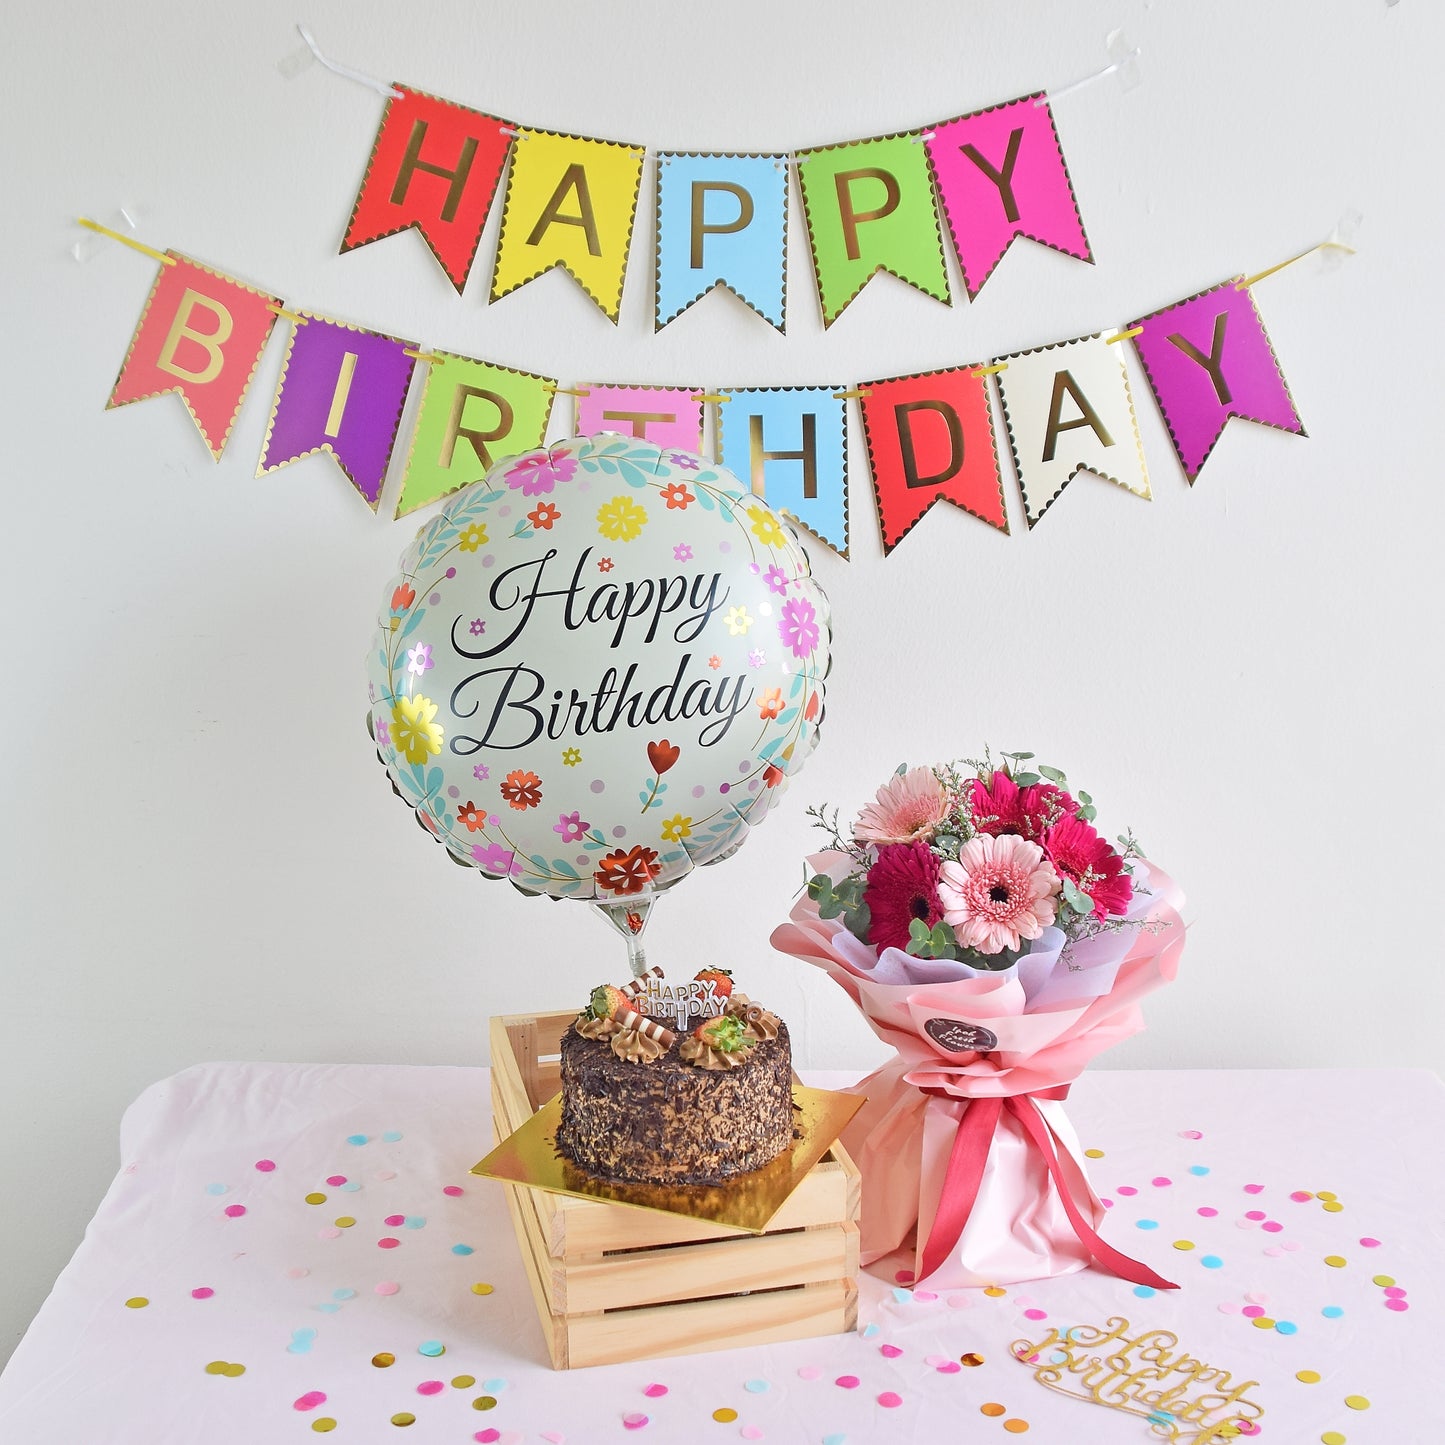 Daisy Beauty Birthday Bundle| Flowers, Balloons&Cake| Same Day Delivery